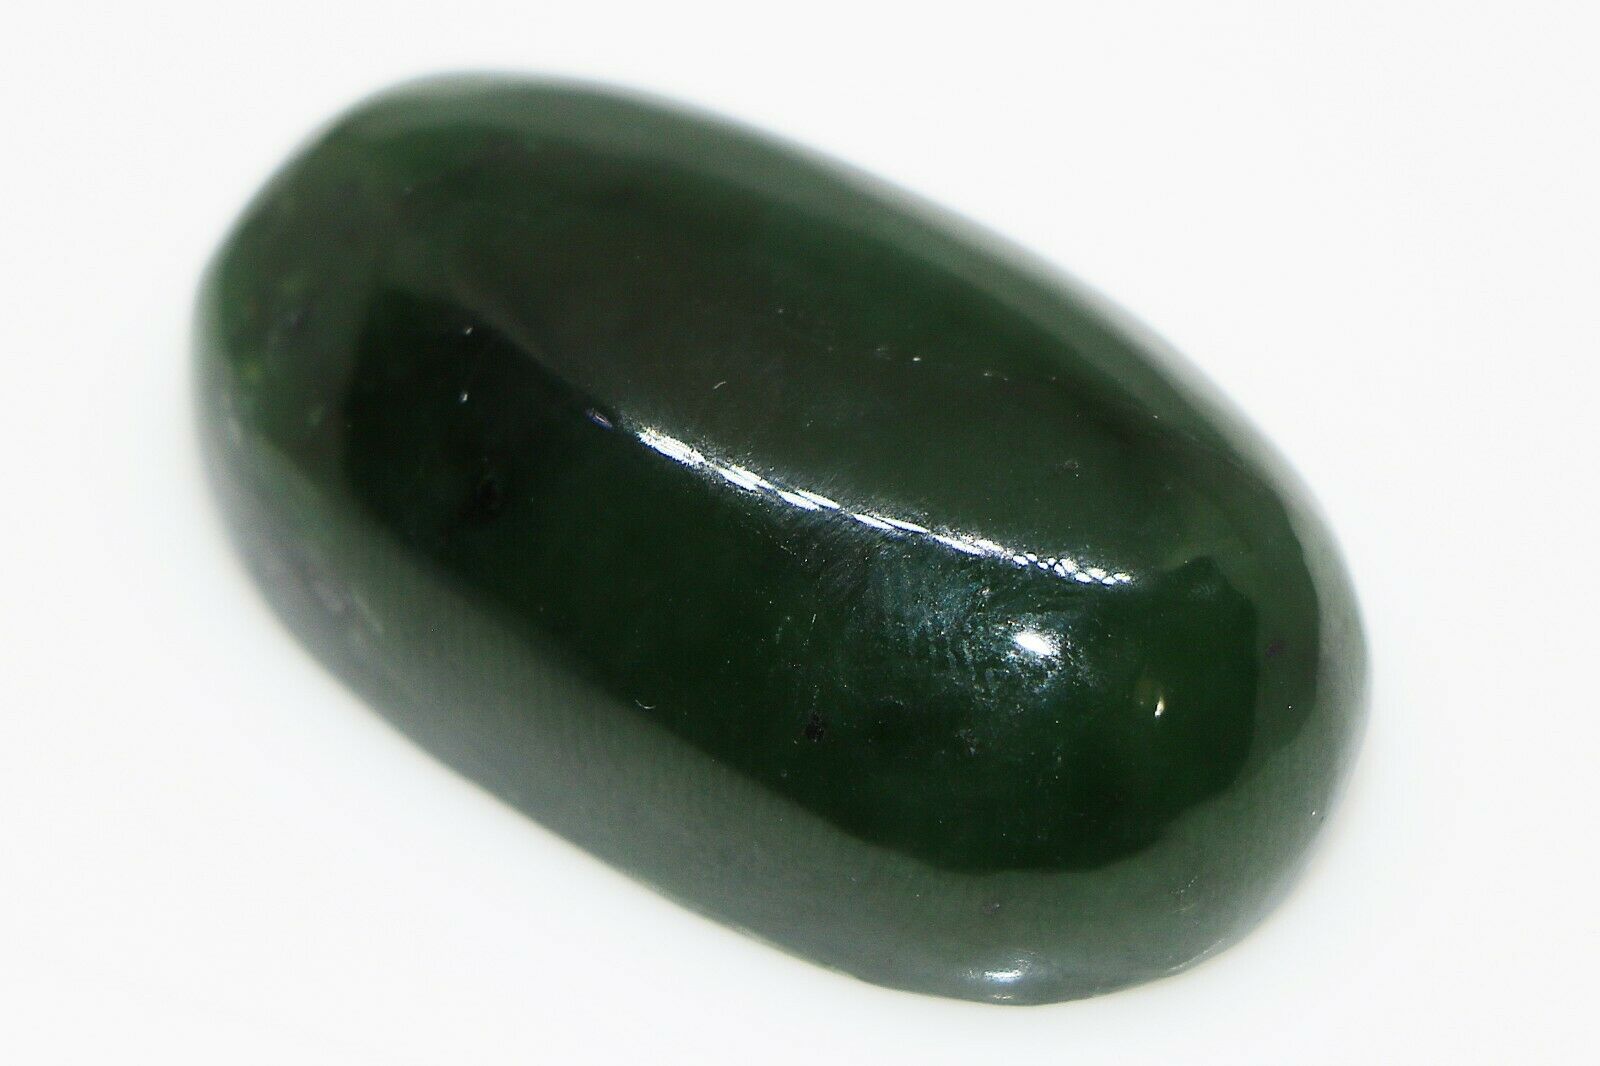 Natural Genuine Rare Nephrite Jade Aaa Loose Stone With Certificate -84.75ct